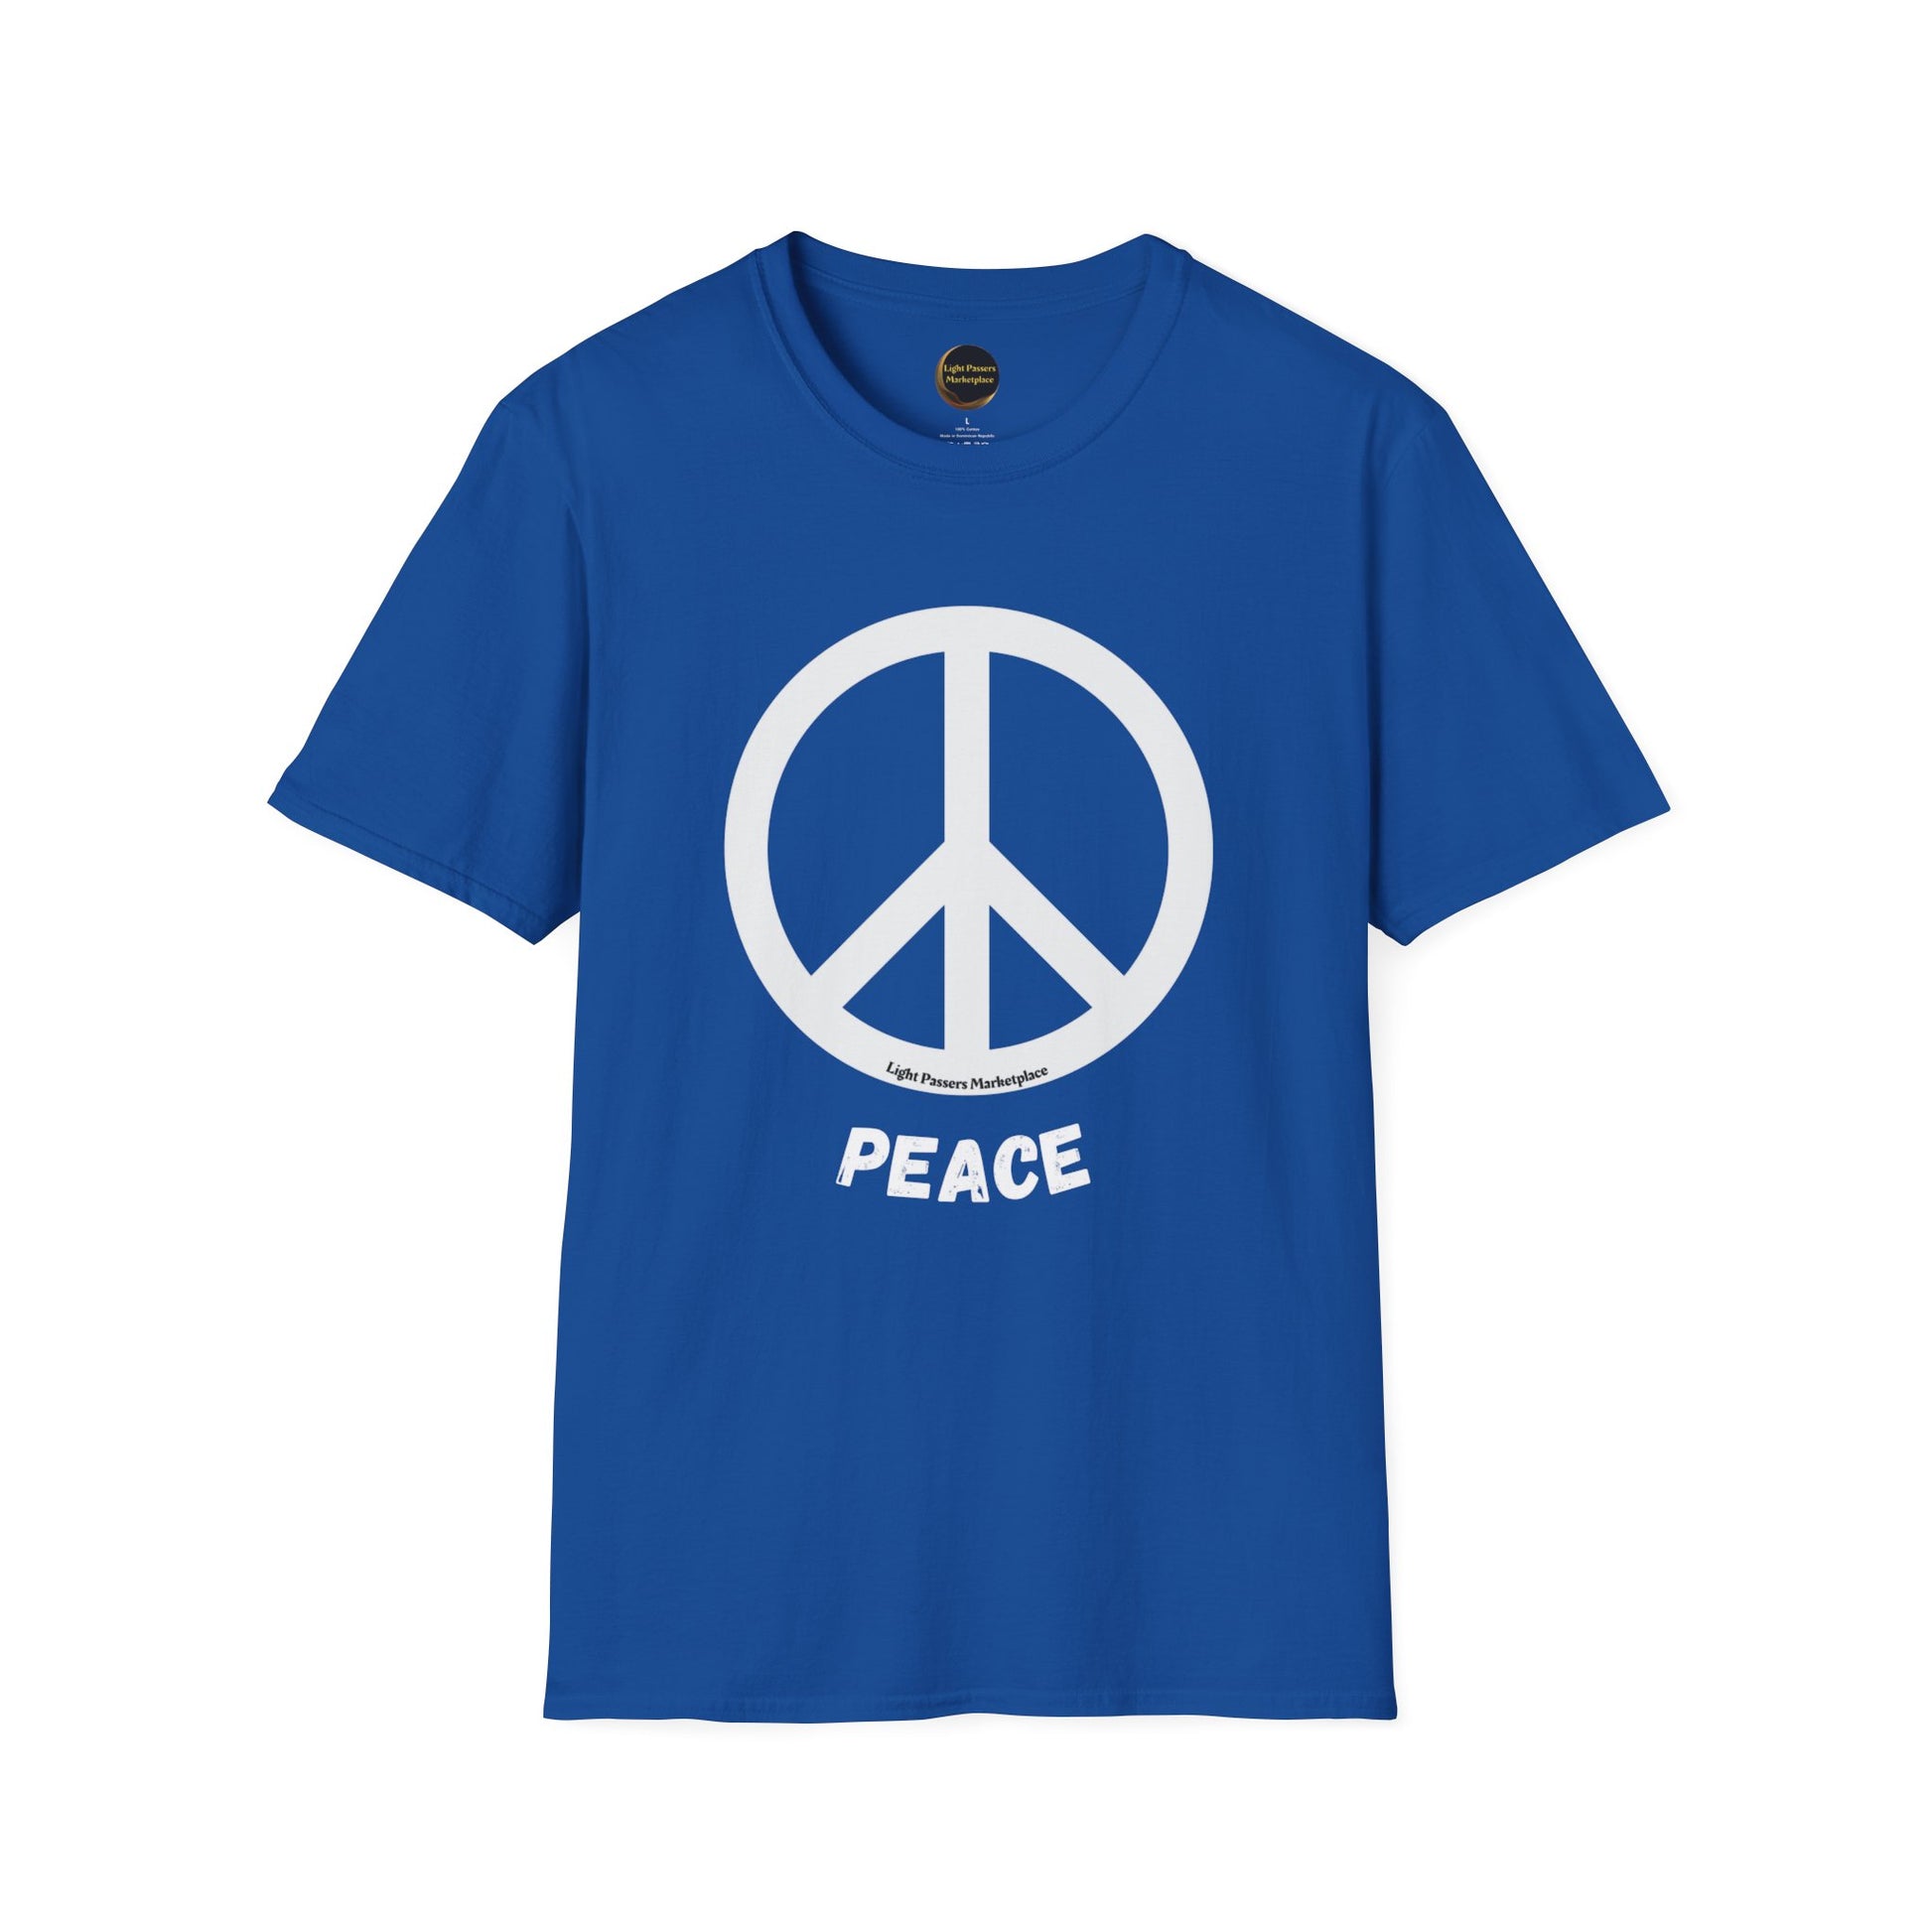 A soft, 100% cotton unisex t-shirt featuring a peace symbol logo on a blue background. Lightweight and durable with a crew neckline, perfect for casual comfort and versatile style.